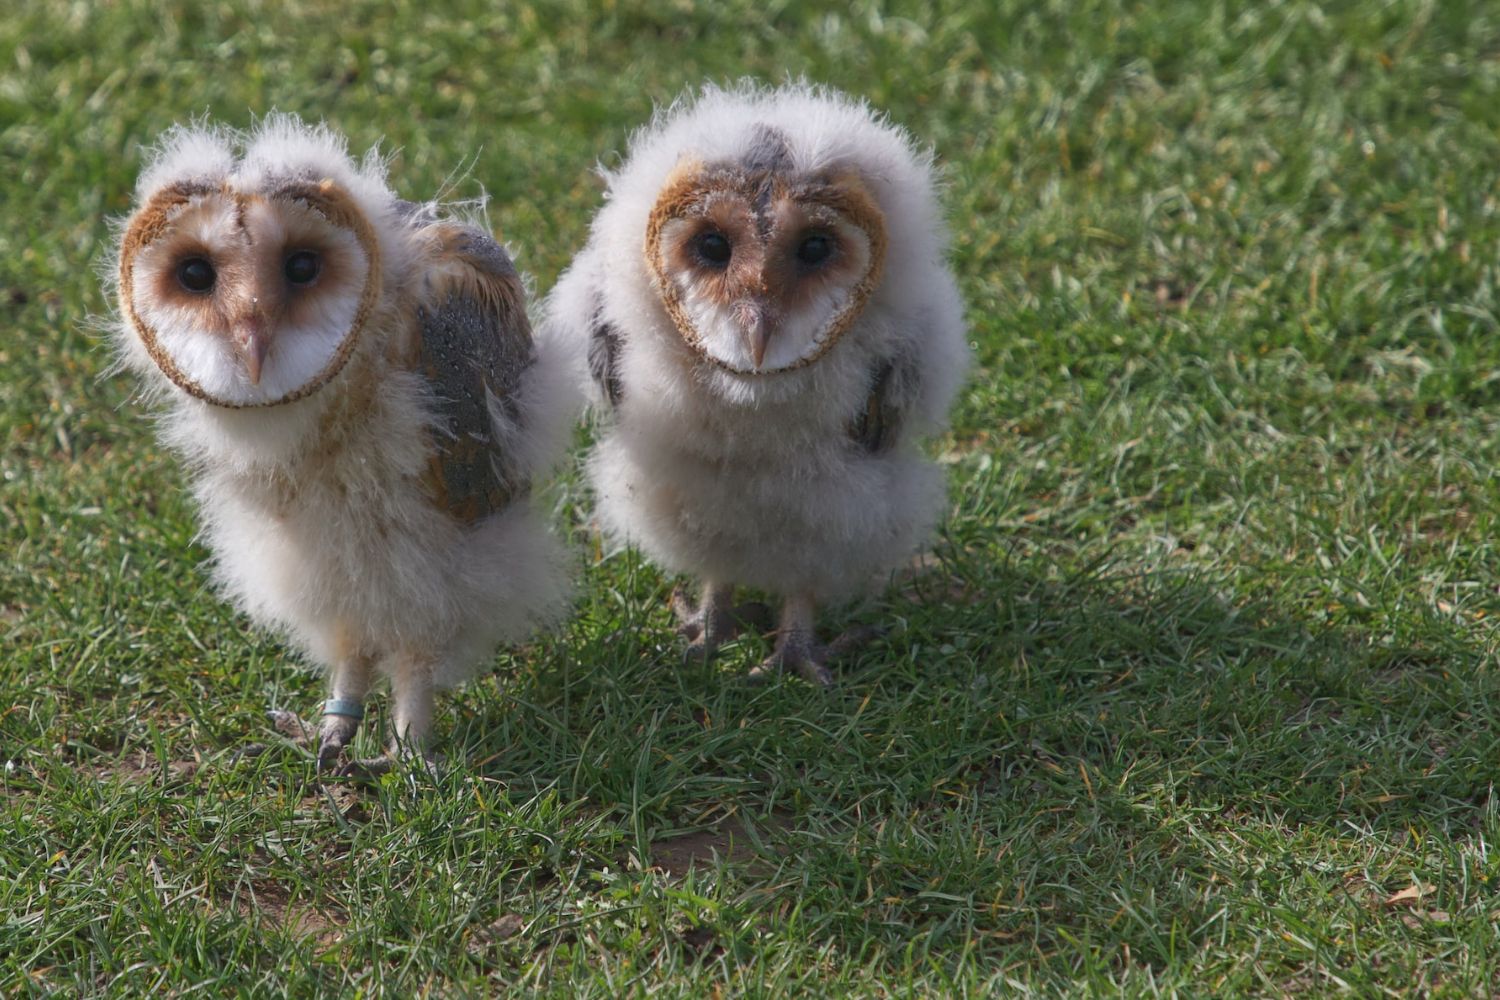 two baby owls standing on the grass